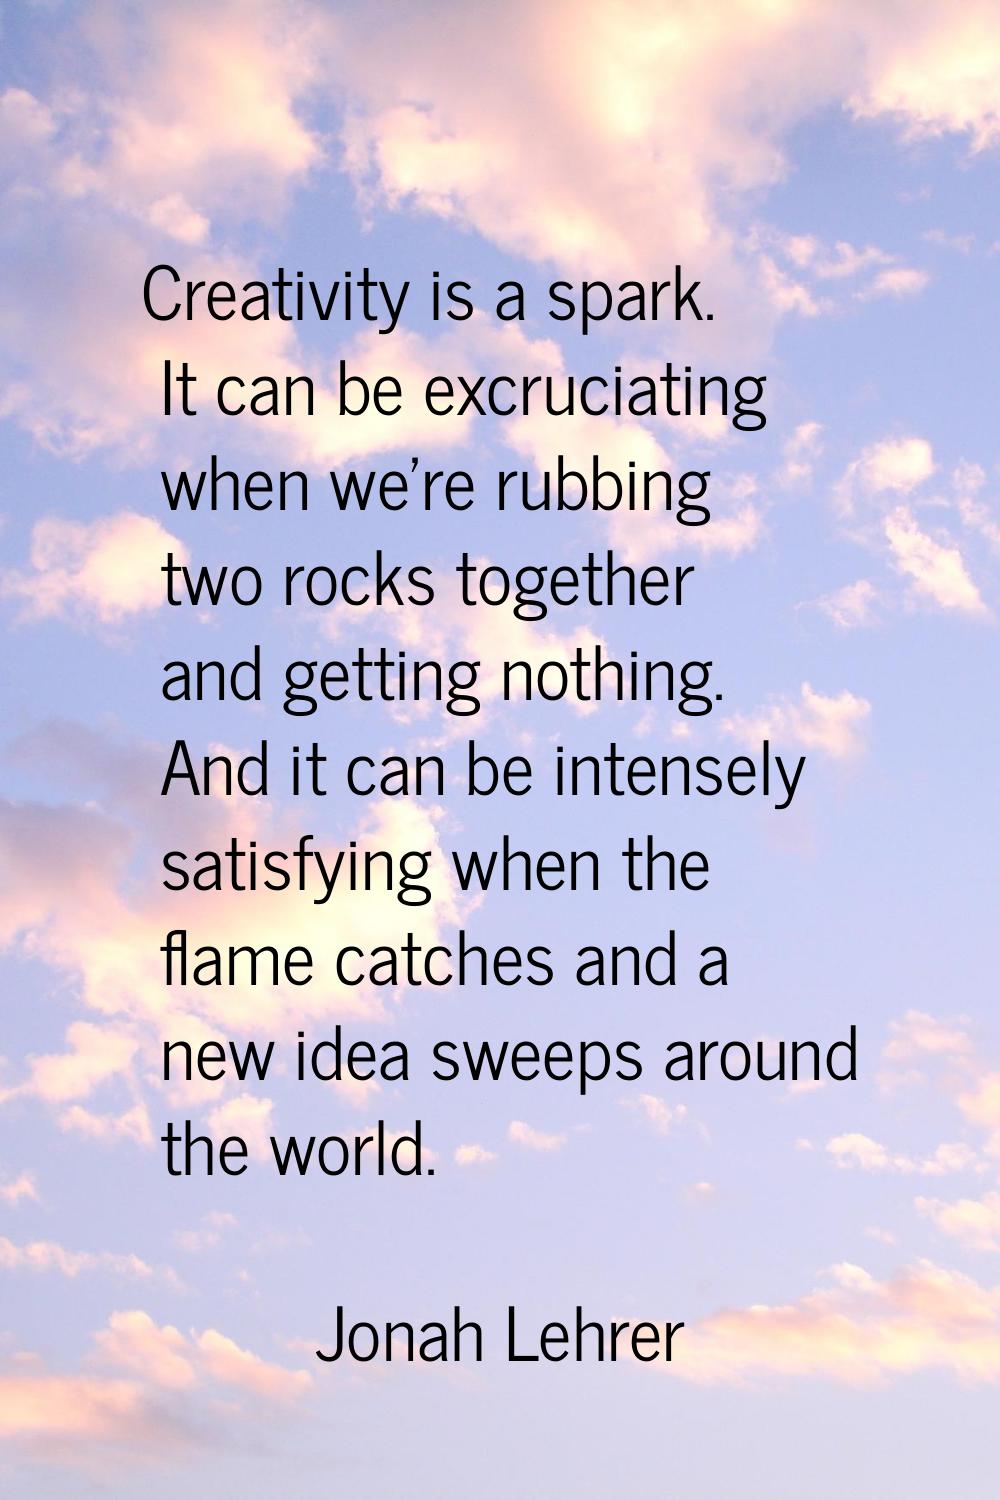 Creativity is a spark. It can be excruciating when we're rubbing two rocks together and getting not